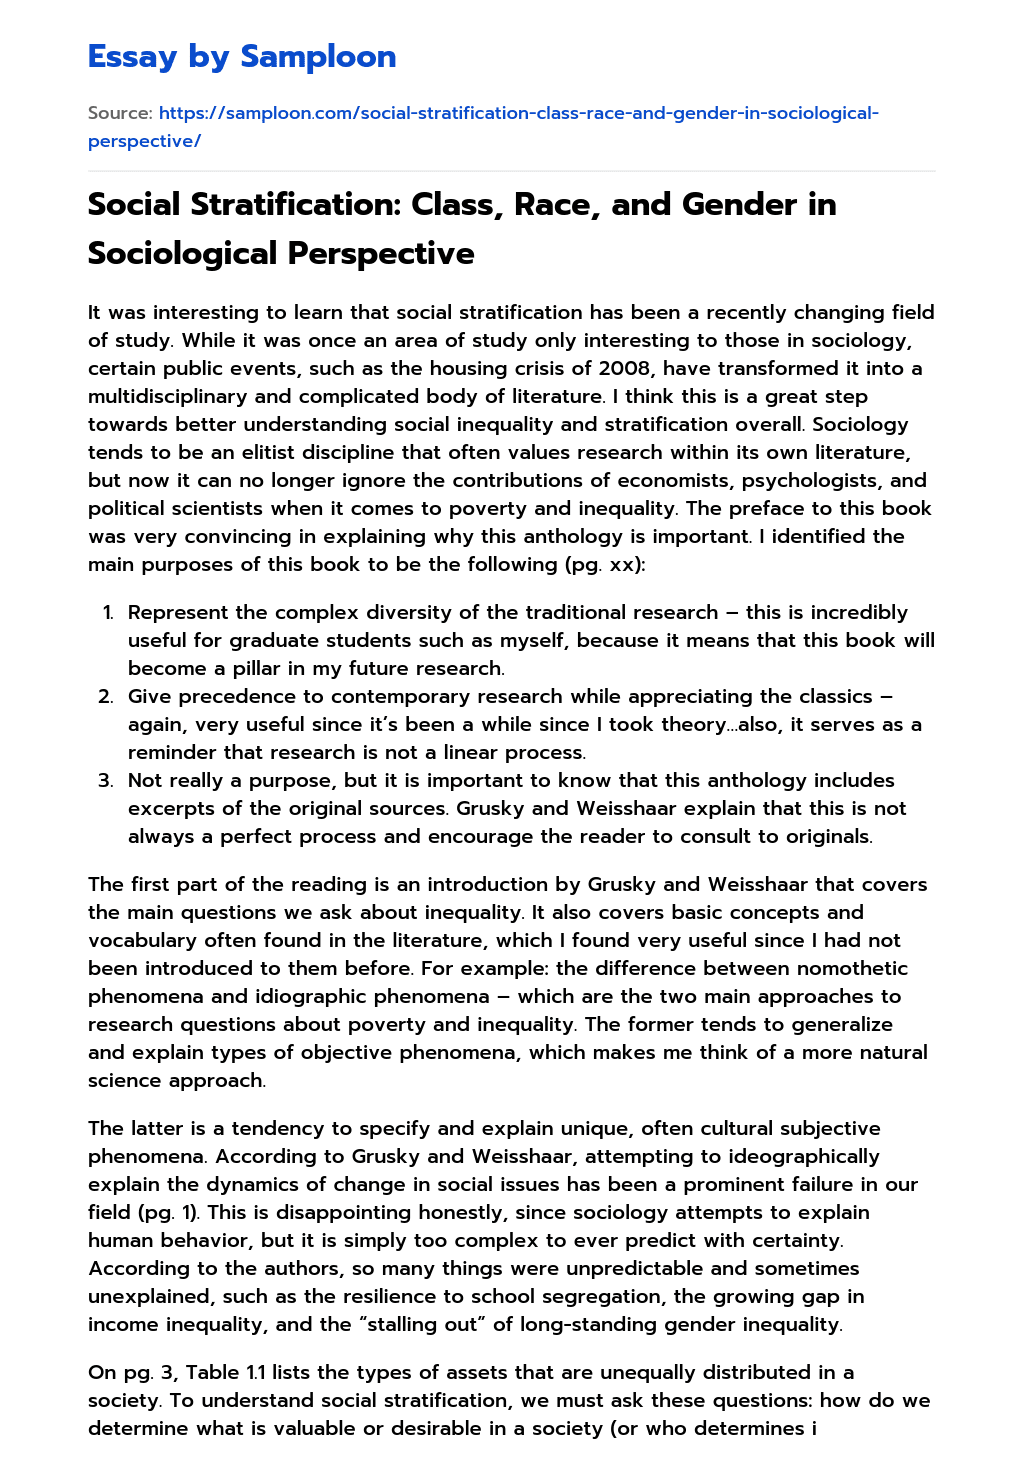 Social Stratification: Class, Race, and Gender in Sociological Perspective essay